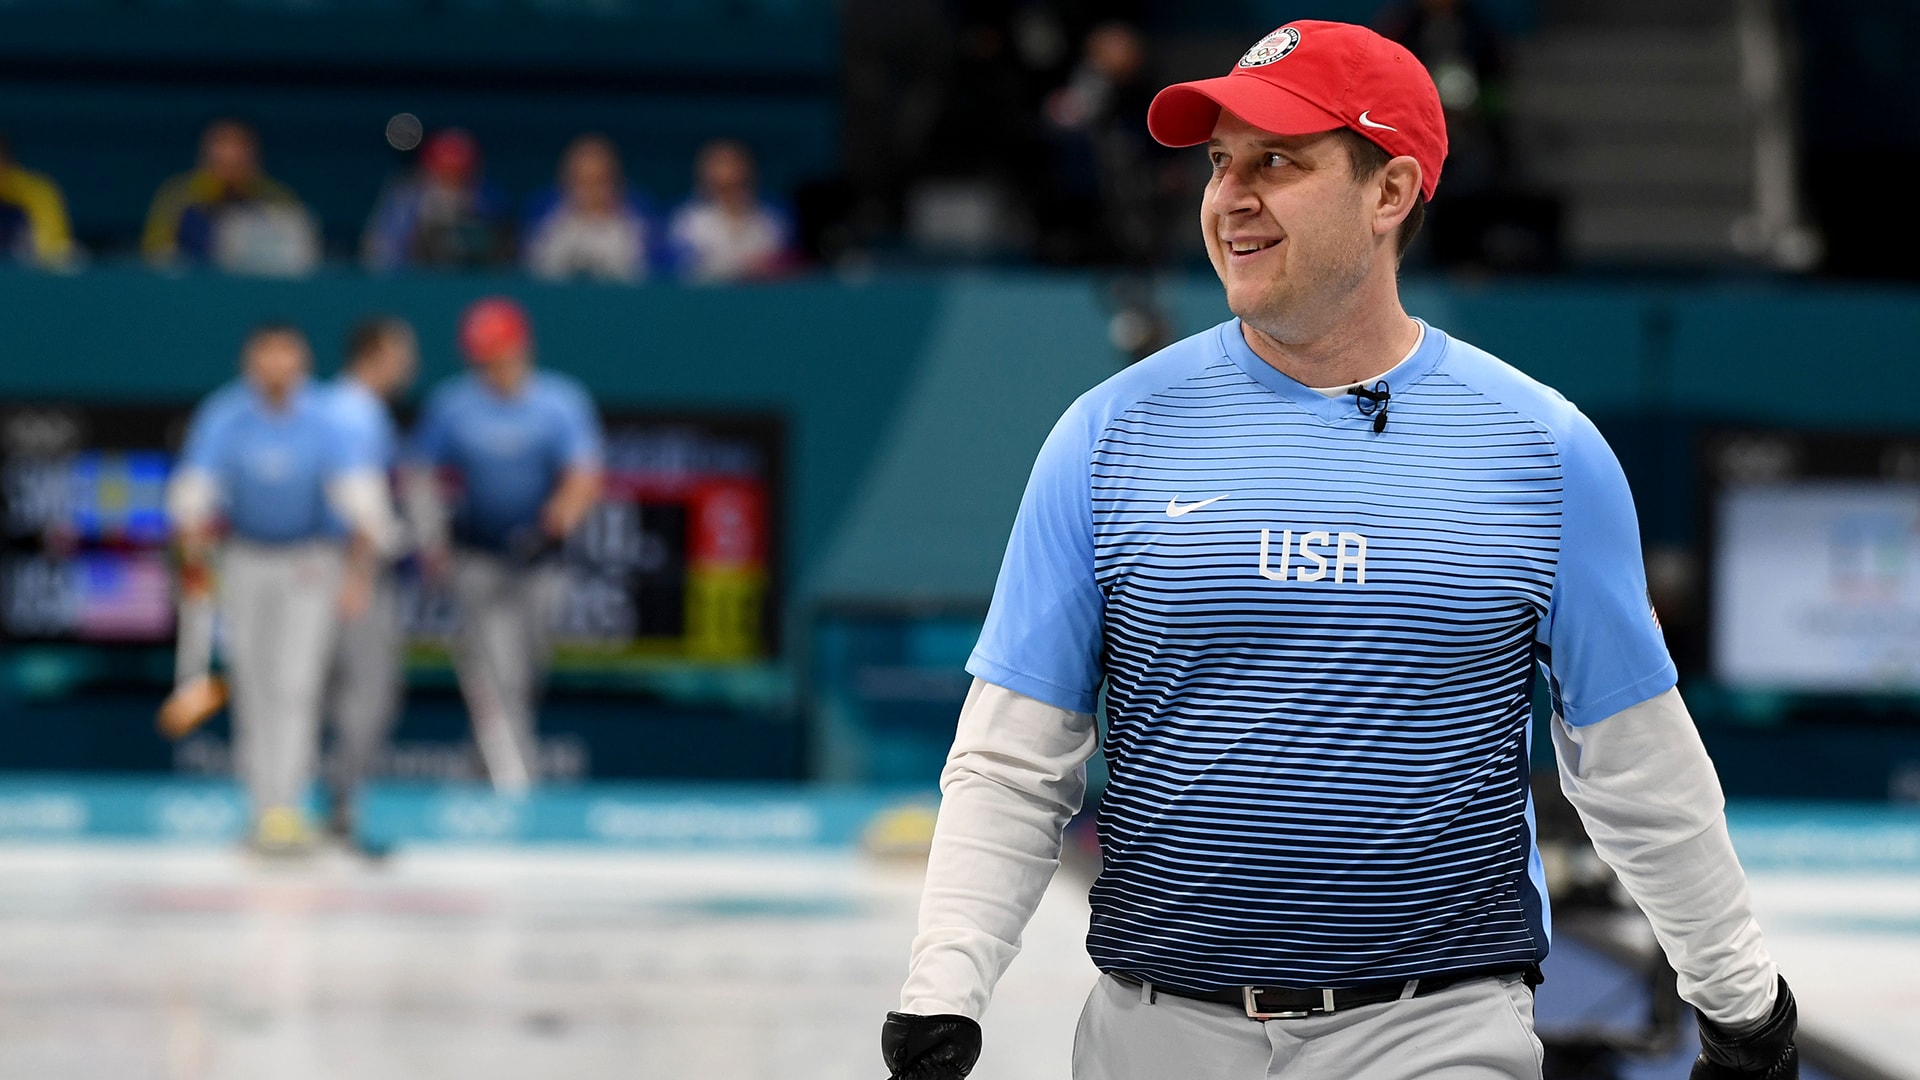 Heres the Curling Winter Olympics Schedule, How to Watch Details